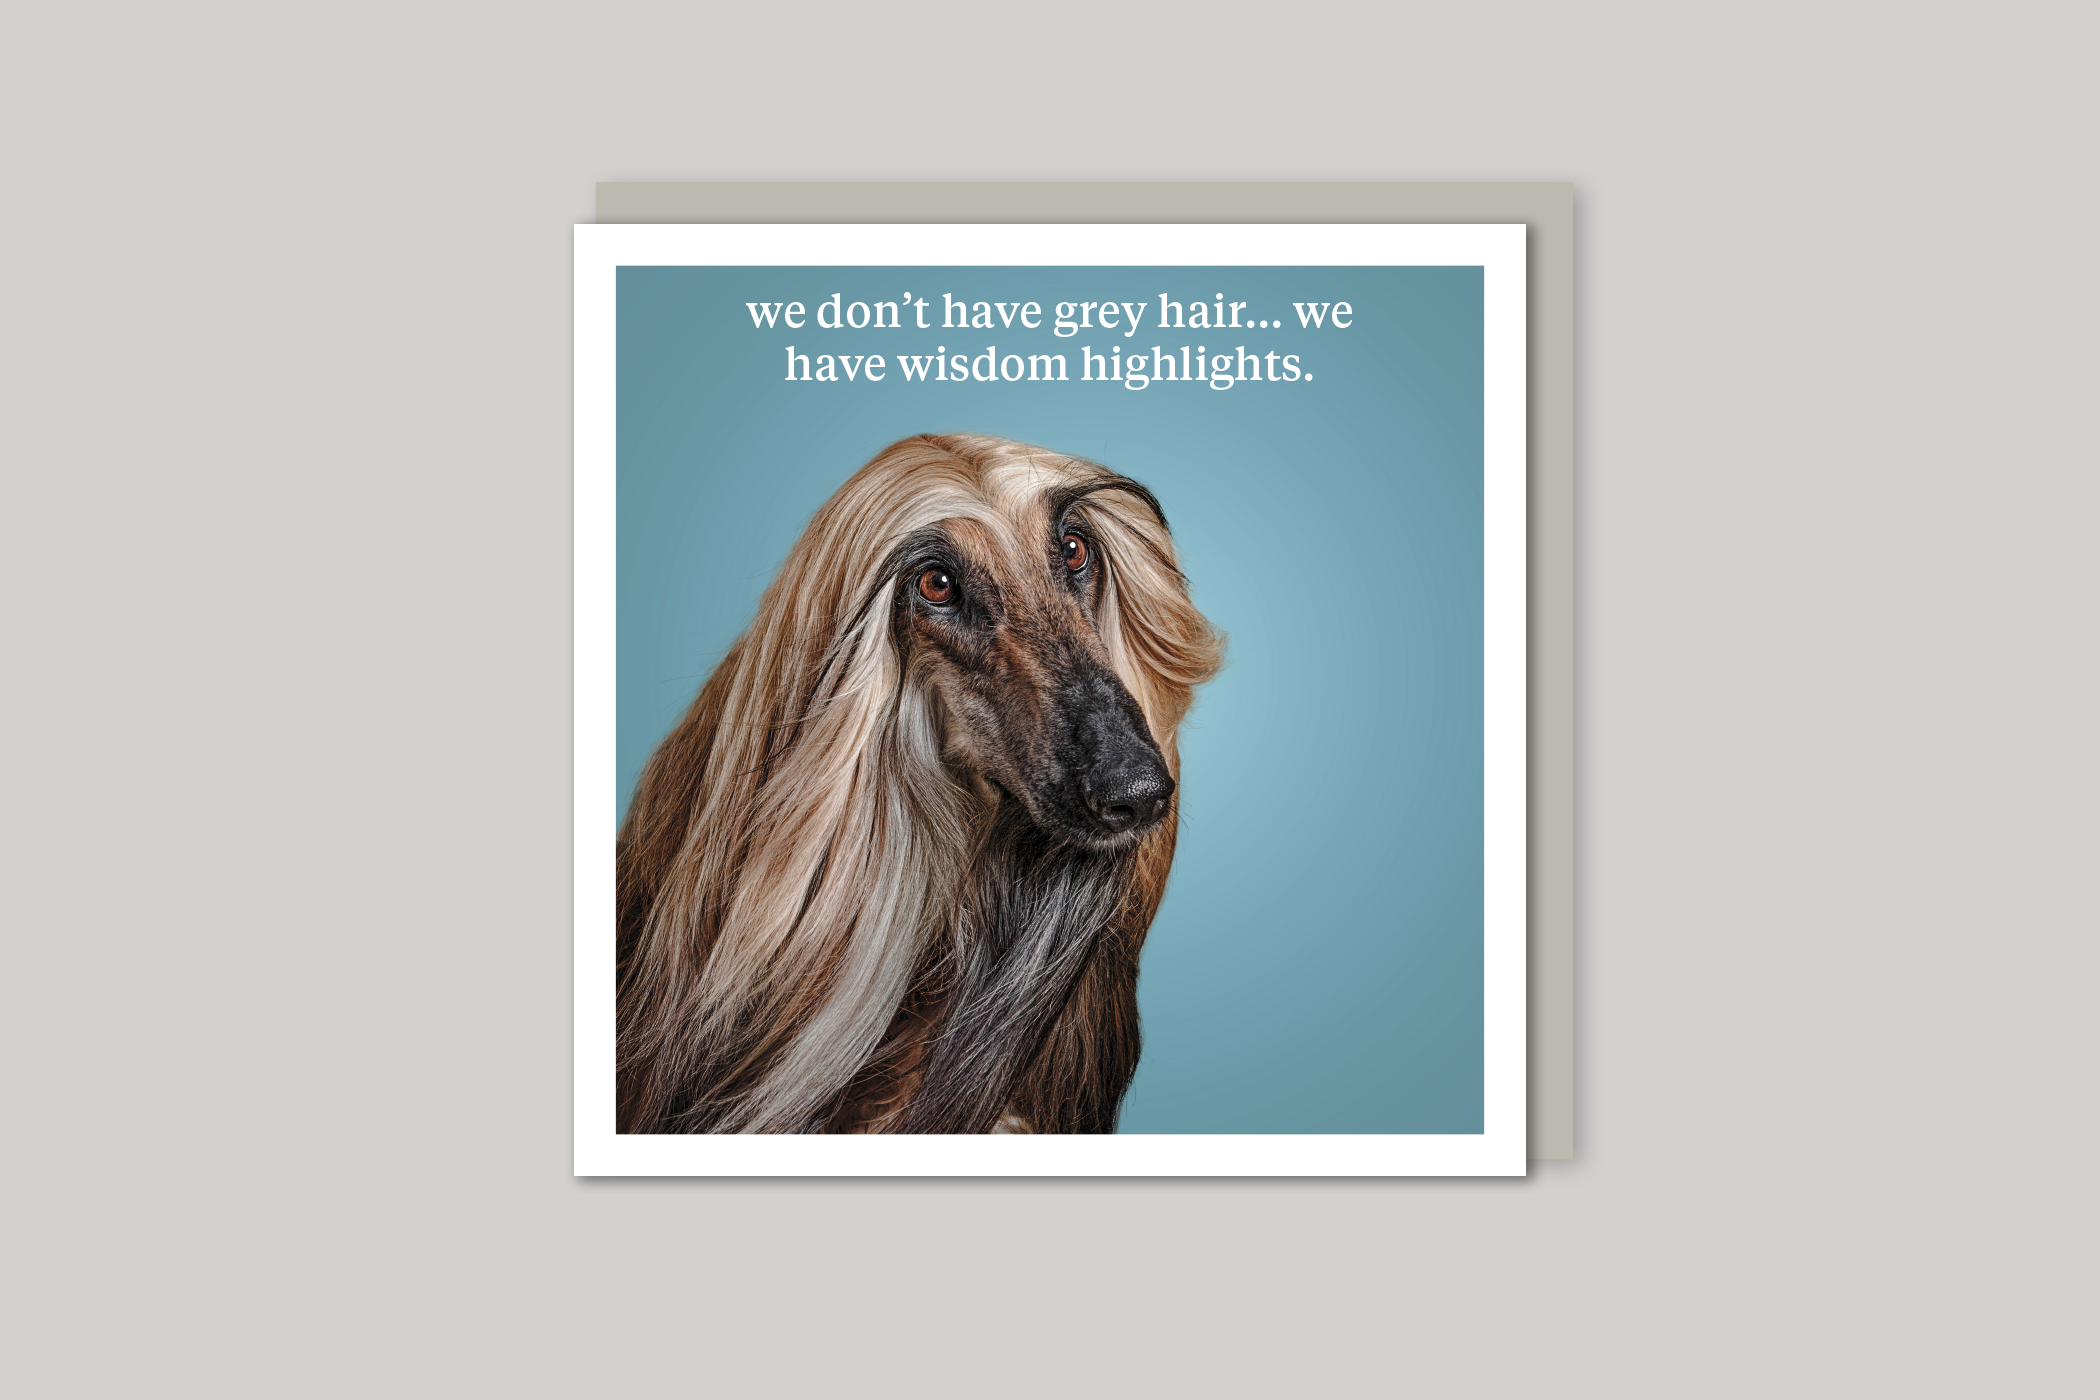 Wisdom Highlights quirky animal portrait from Curious World range of greeting cards by Icon, back page.